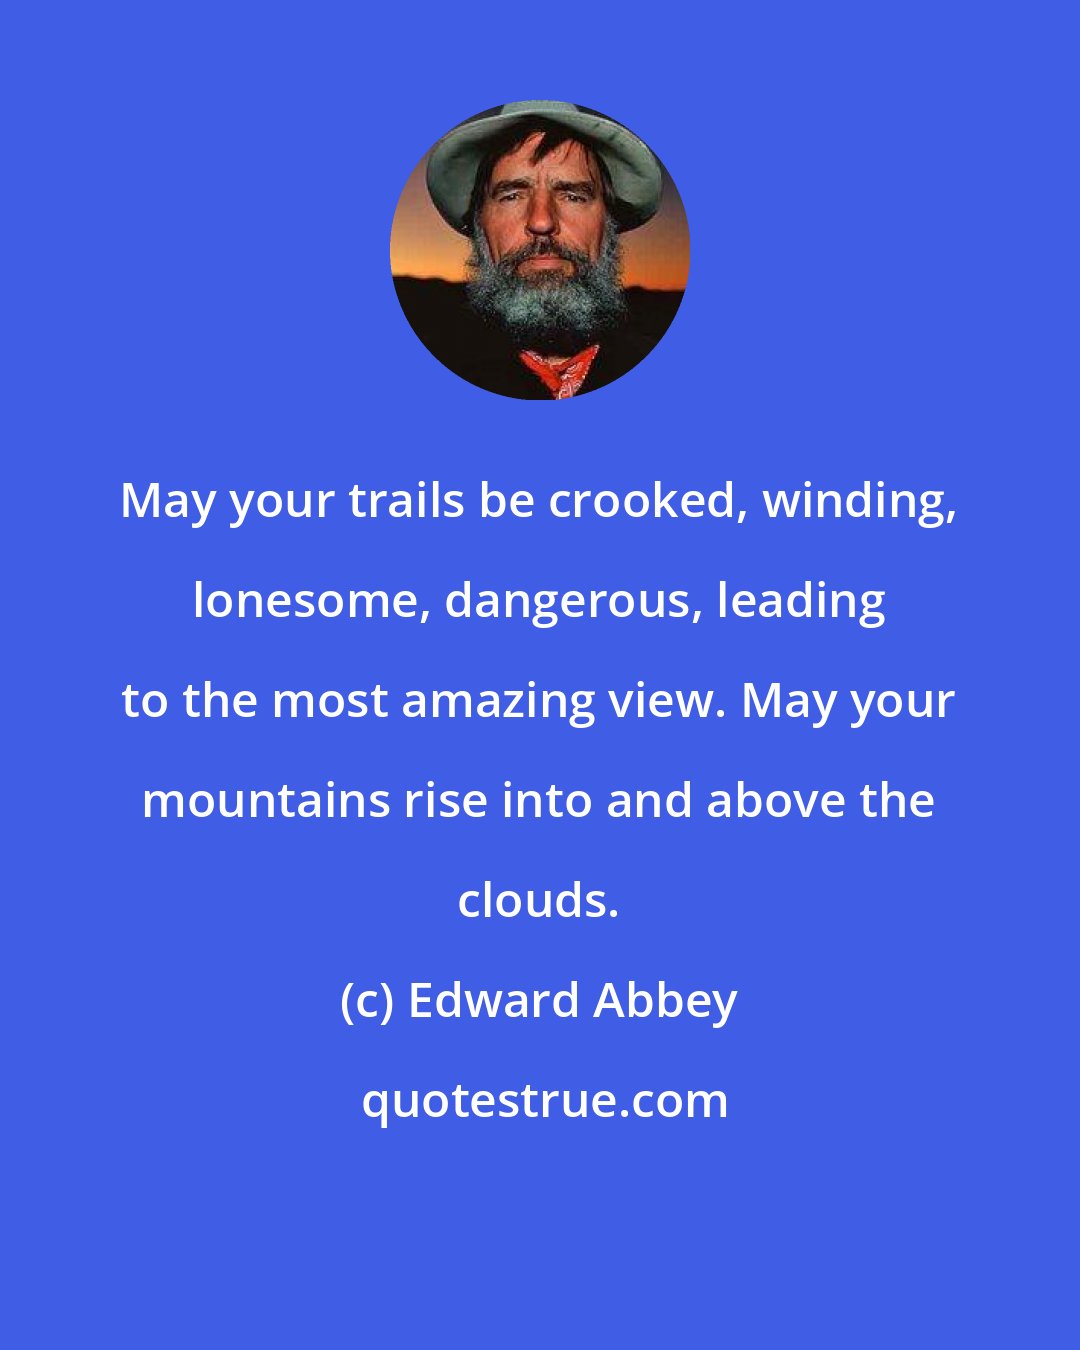 Edward Abbey: May your trails be crooked, winding, lonesome, dangerous, leading to the most amazing view. May your mountains rise into and above the clouds.